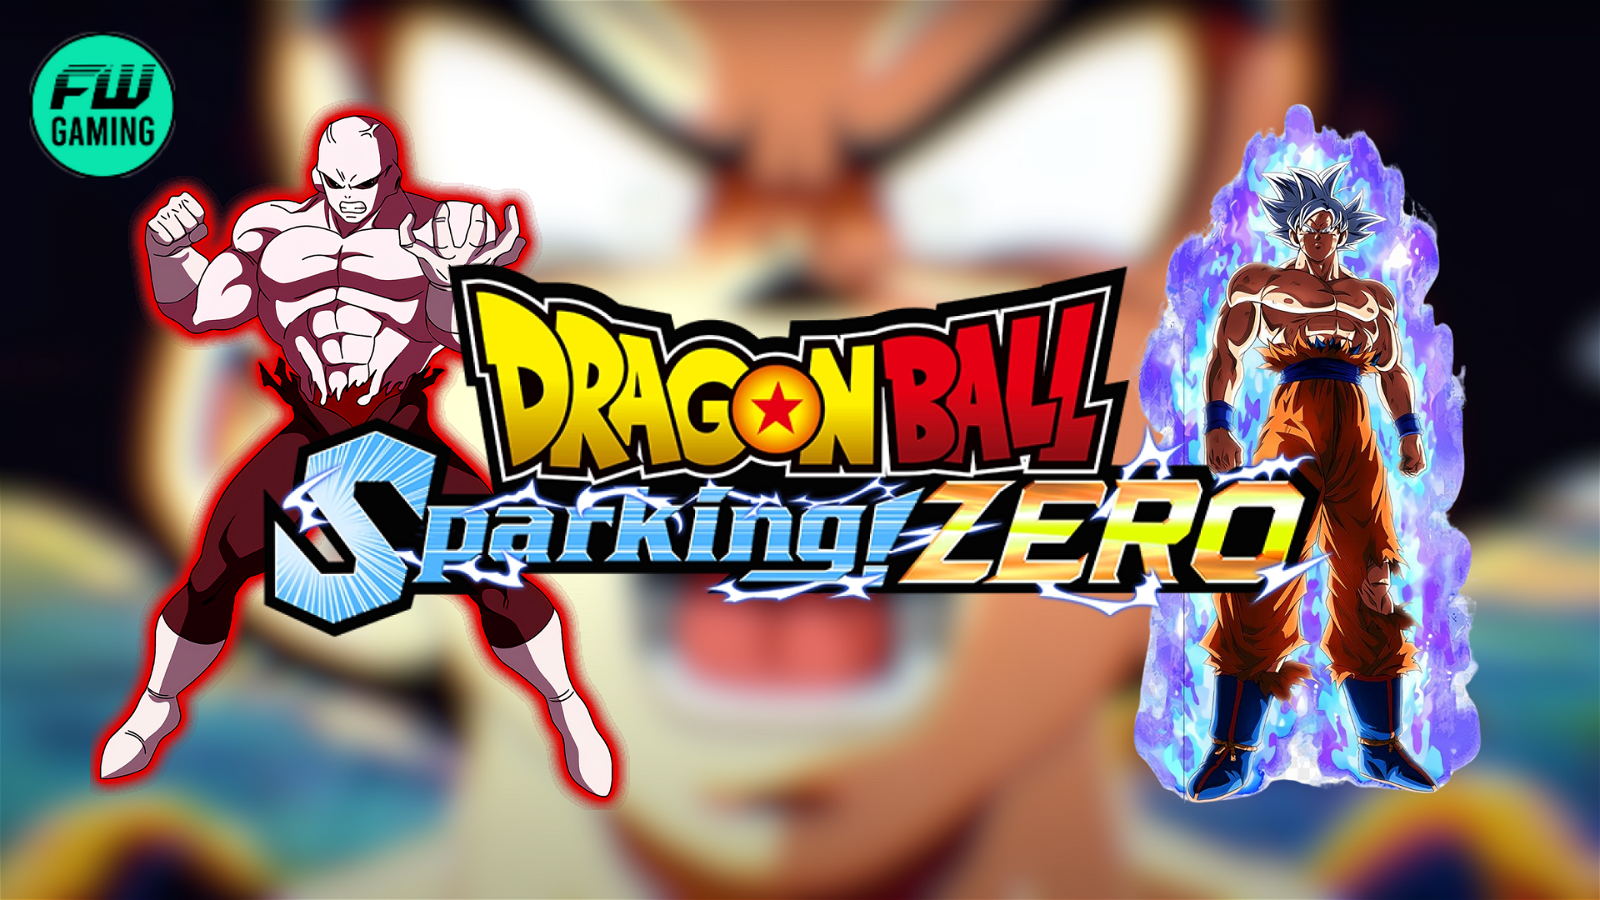 Dragon Ball: Sparking Zero’s Next Trailer Has Been Pieced Together, and It’s Going to Be a Big One